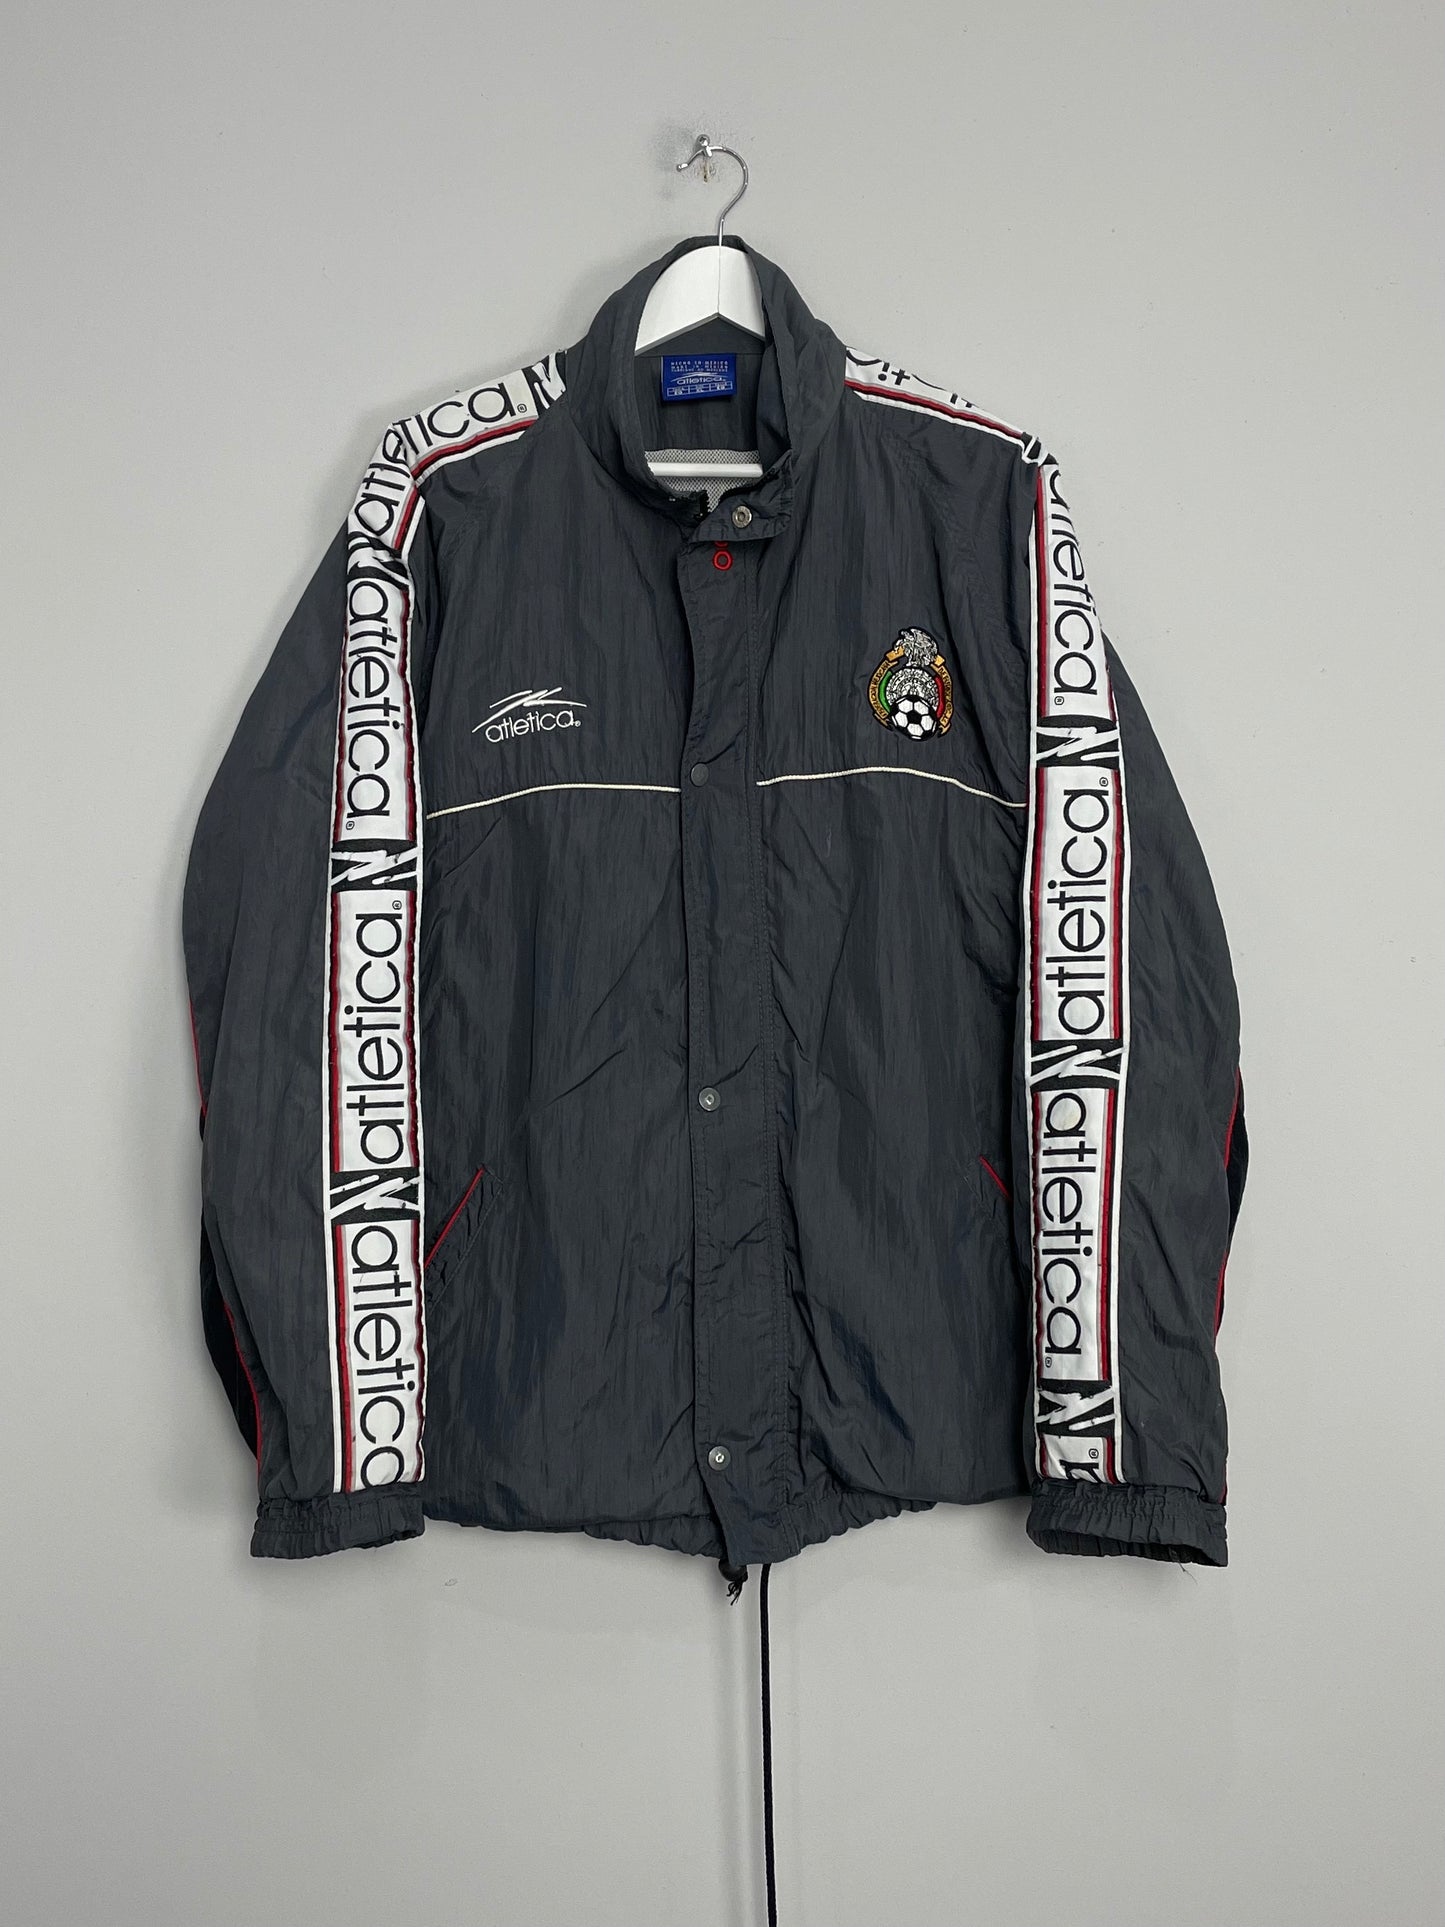 Image of the Mexico jacket from the 2000/01 season